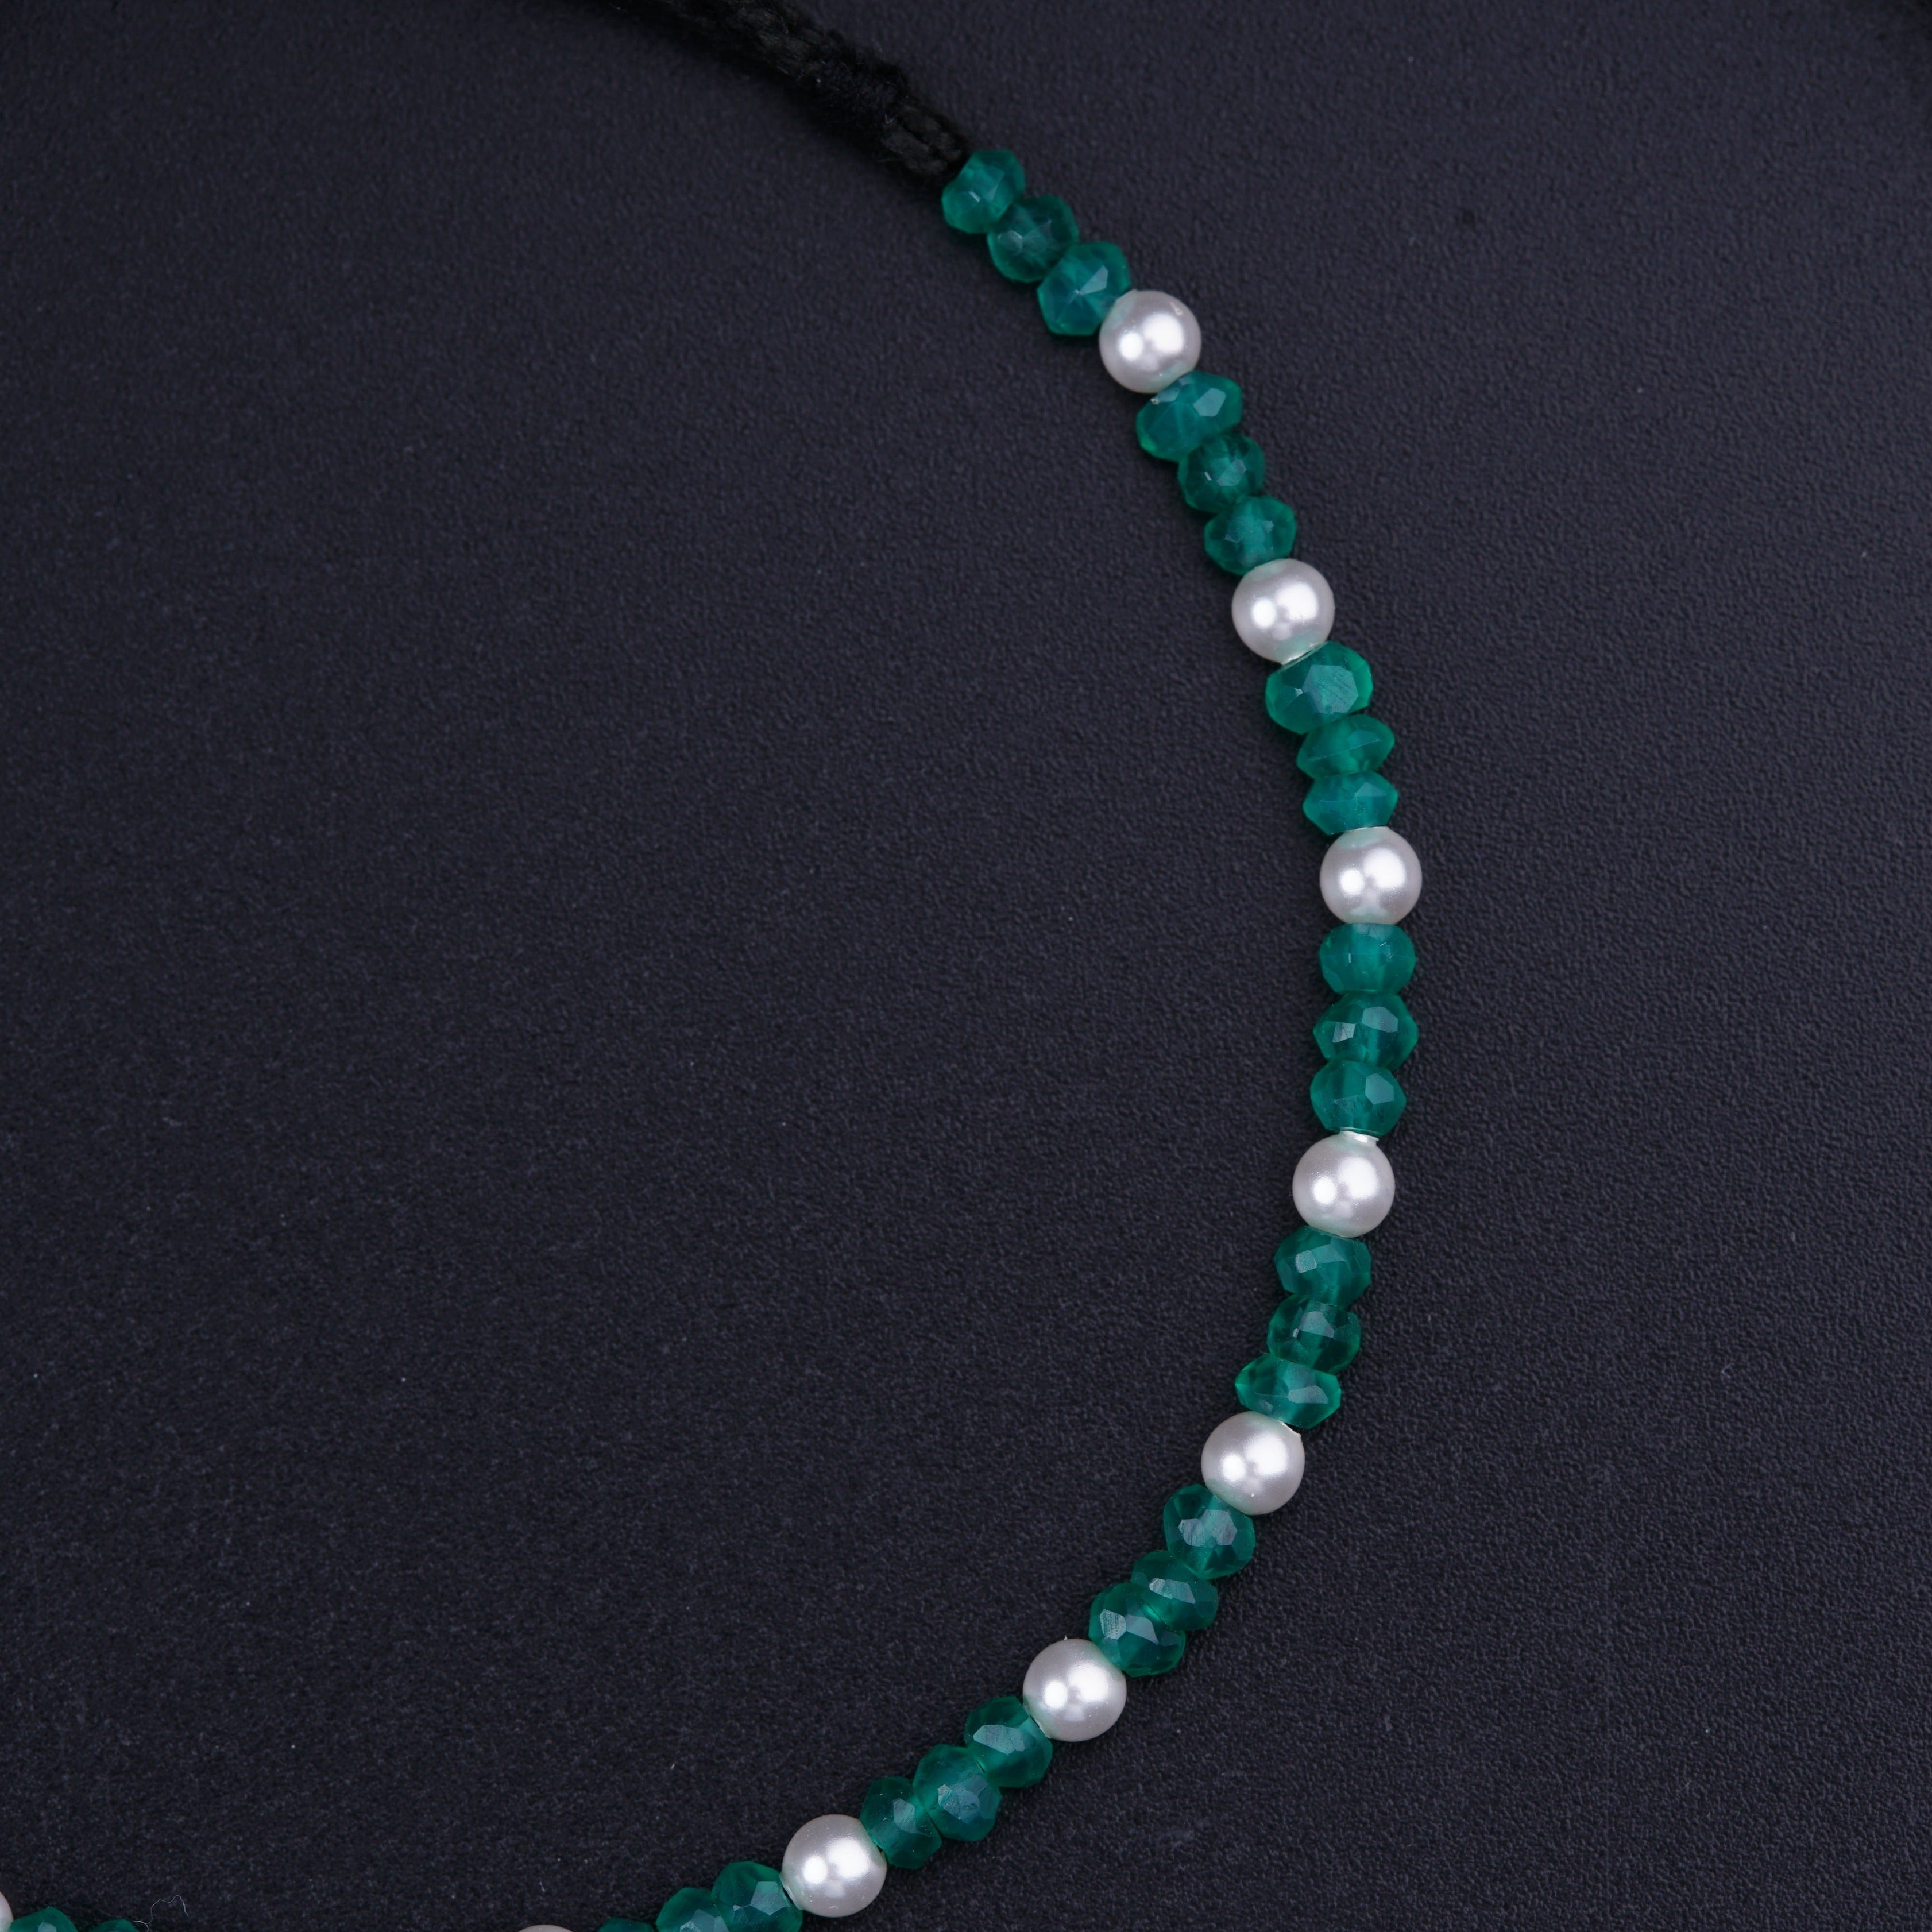 a necklace with pearls and green glass beads